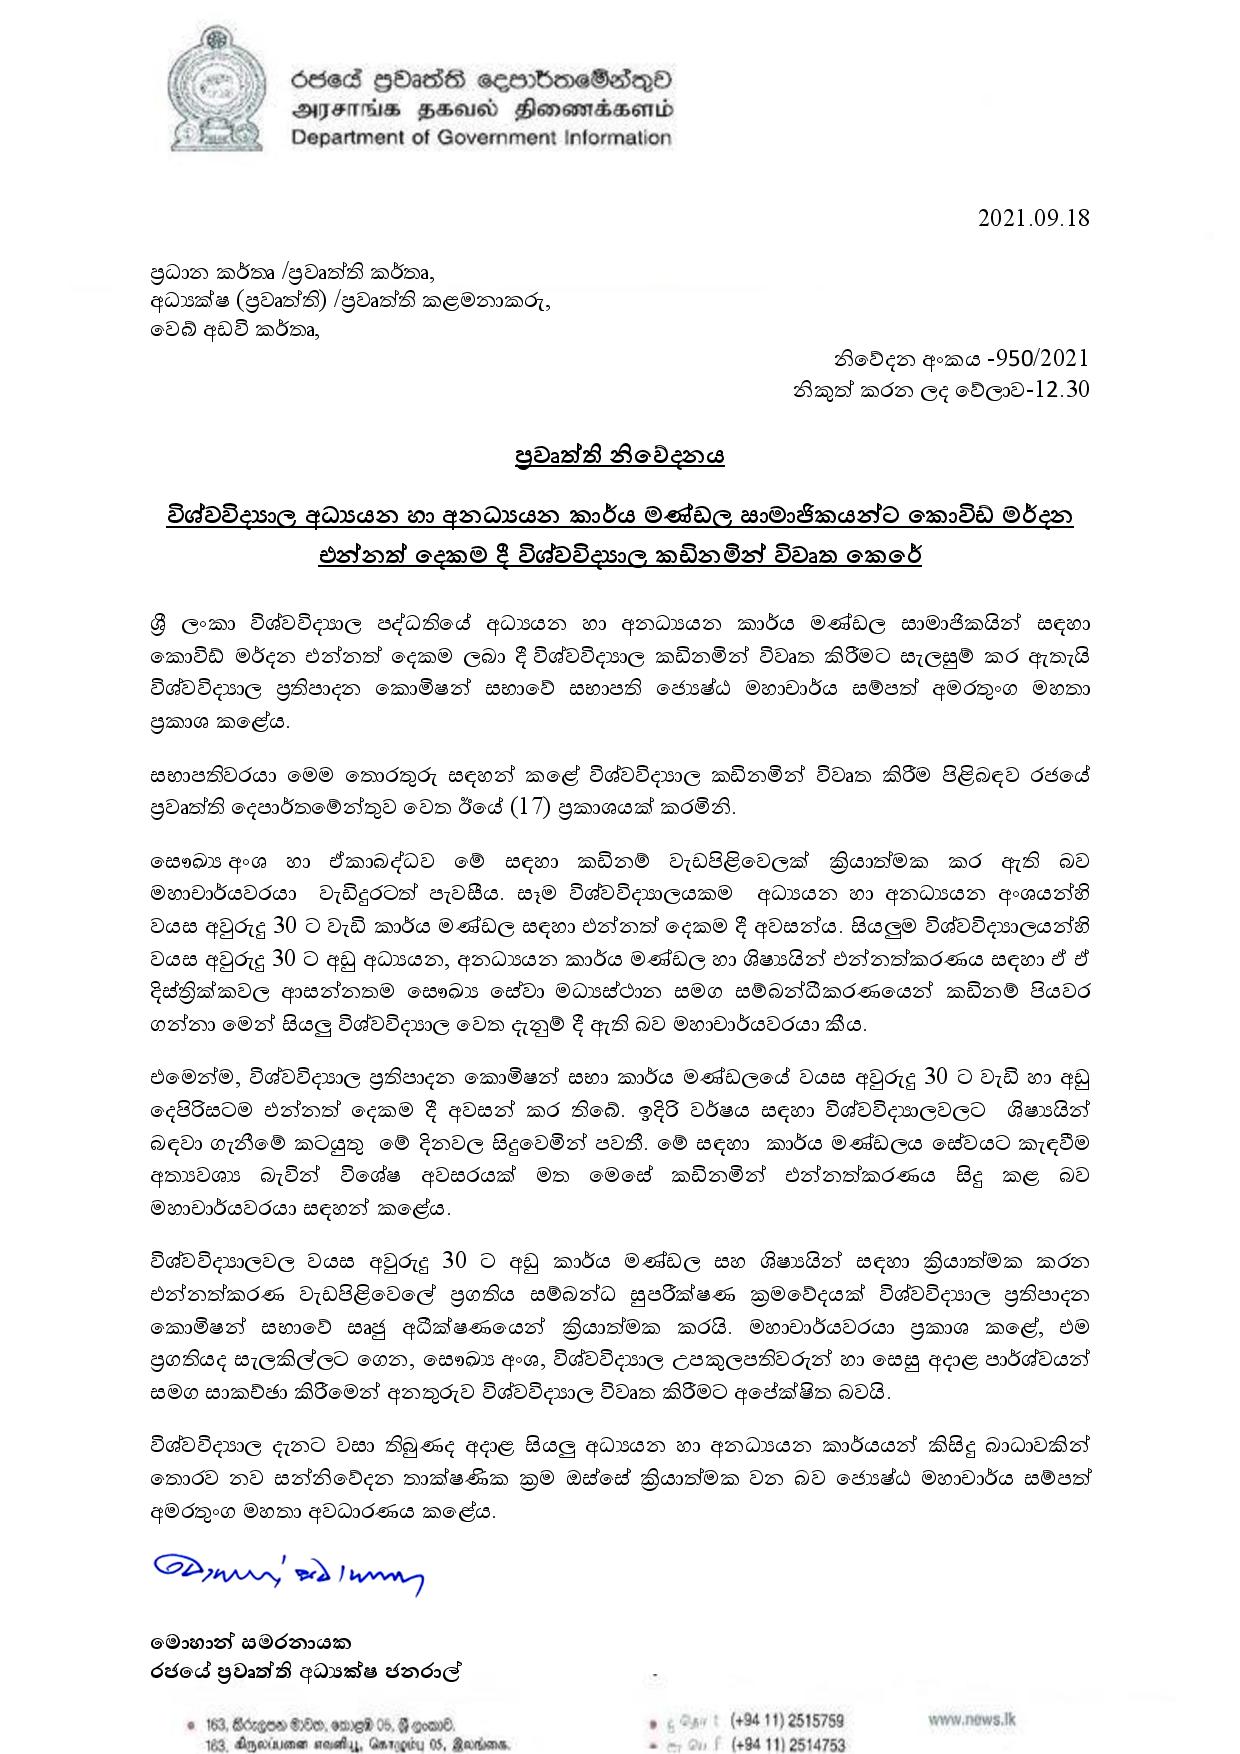 Media Release of UGC page 001